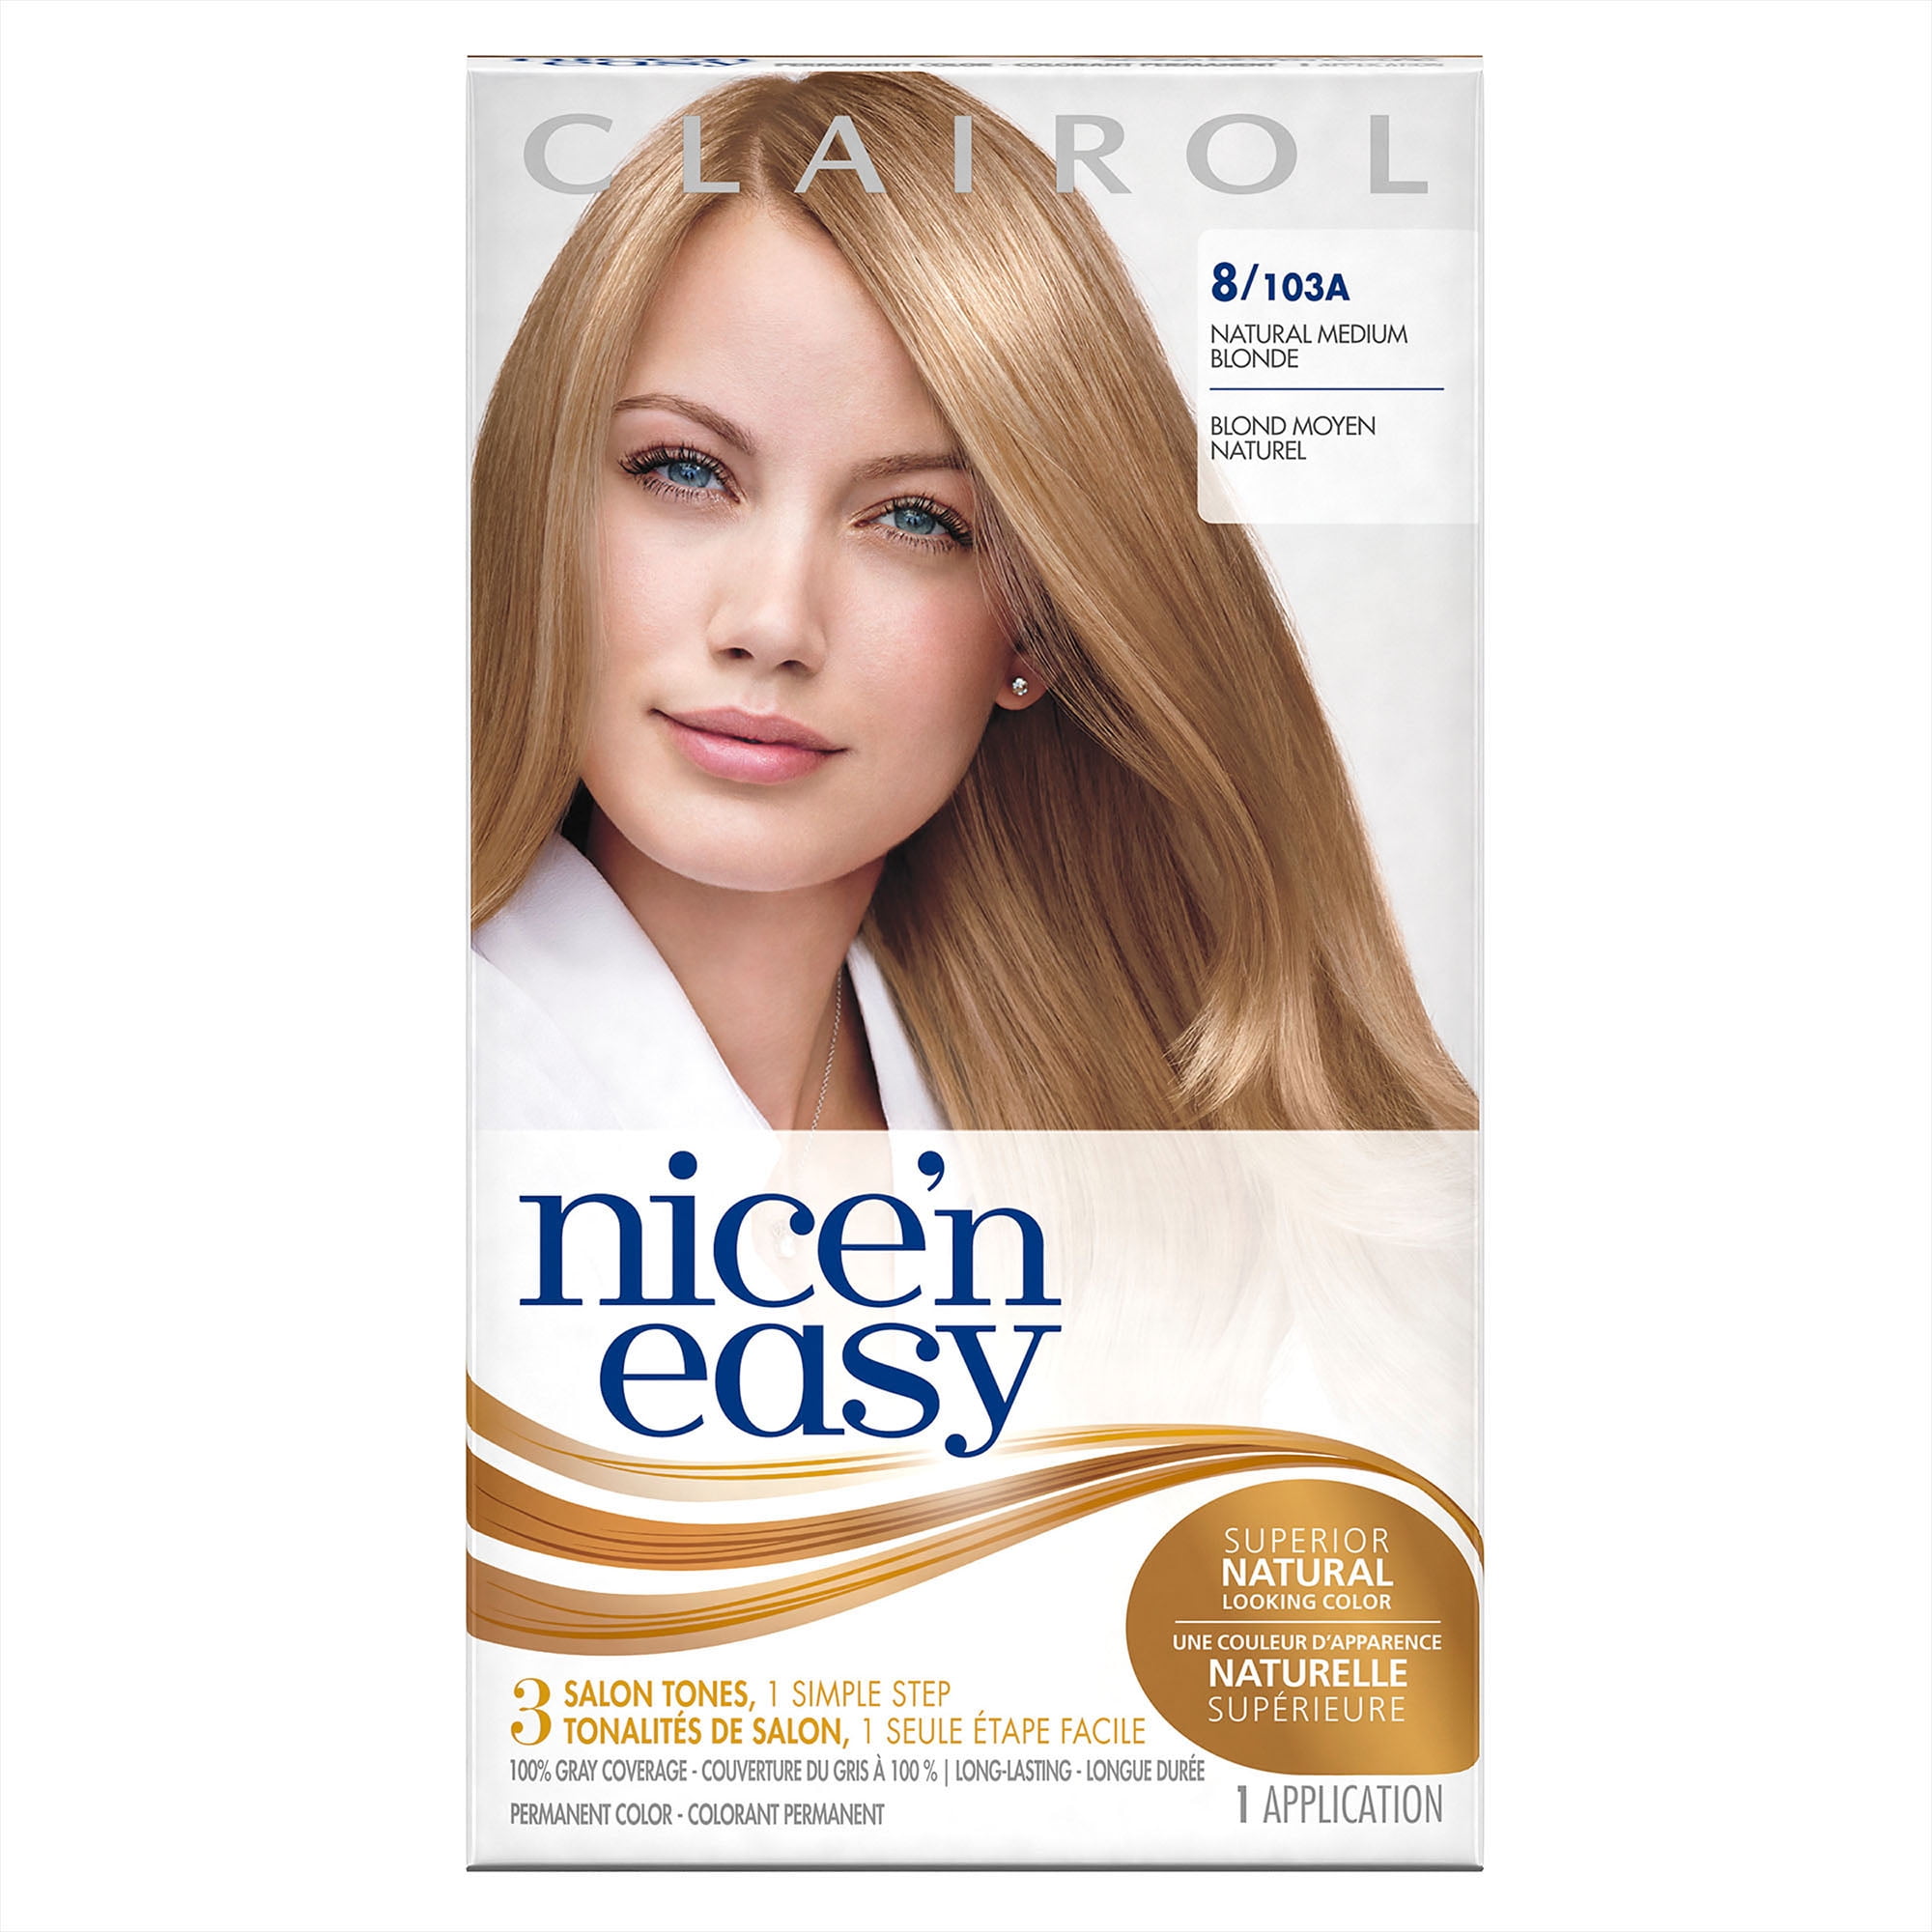 Try out a new experience and take your look to the next level with natural medium...